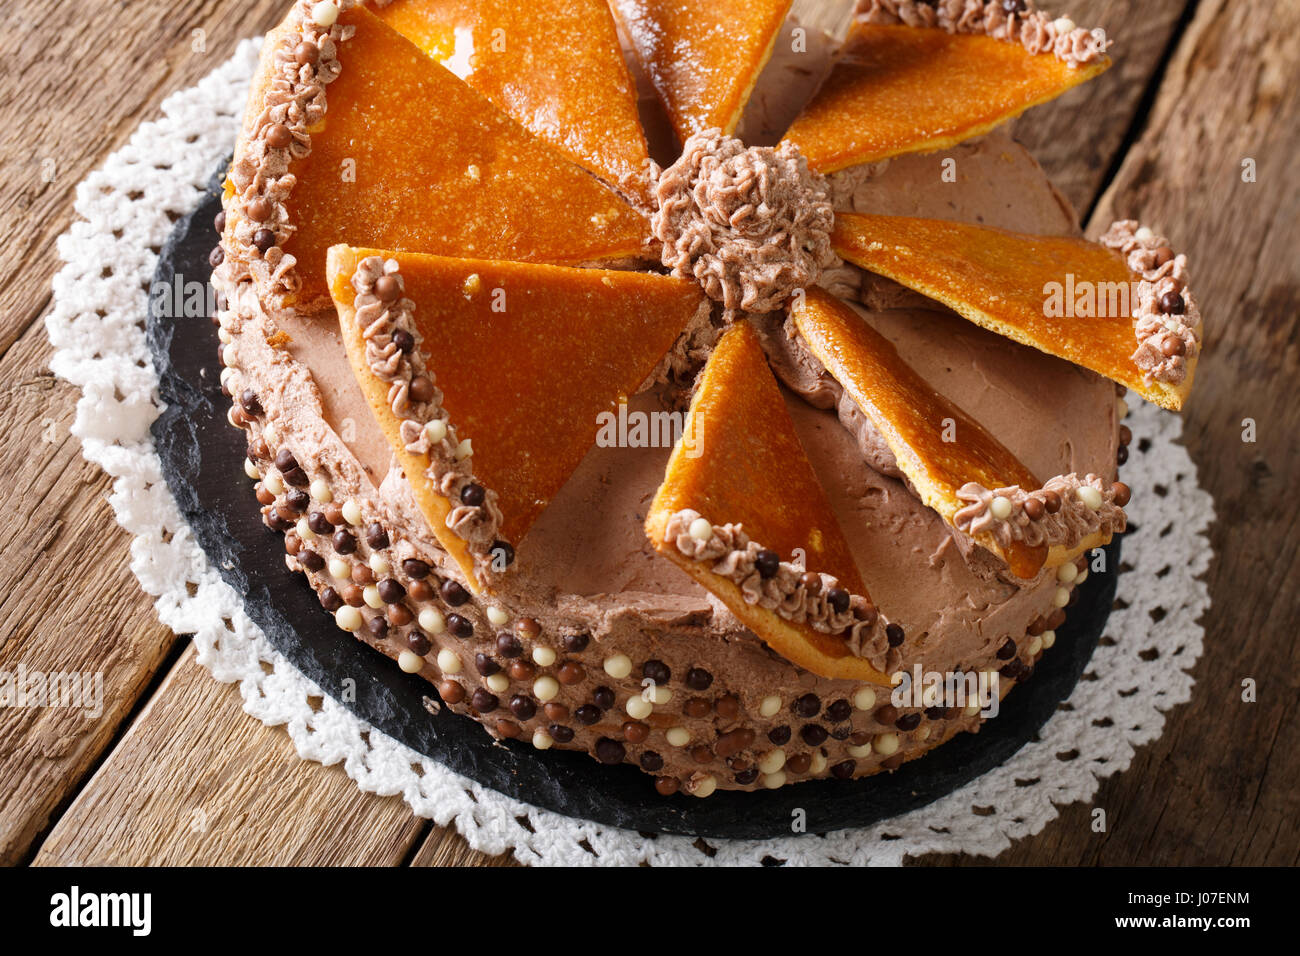 Hungarian Dobosh cake with caramel and butter cream close-up on a plate. Horizontal Stock Photo